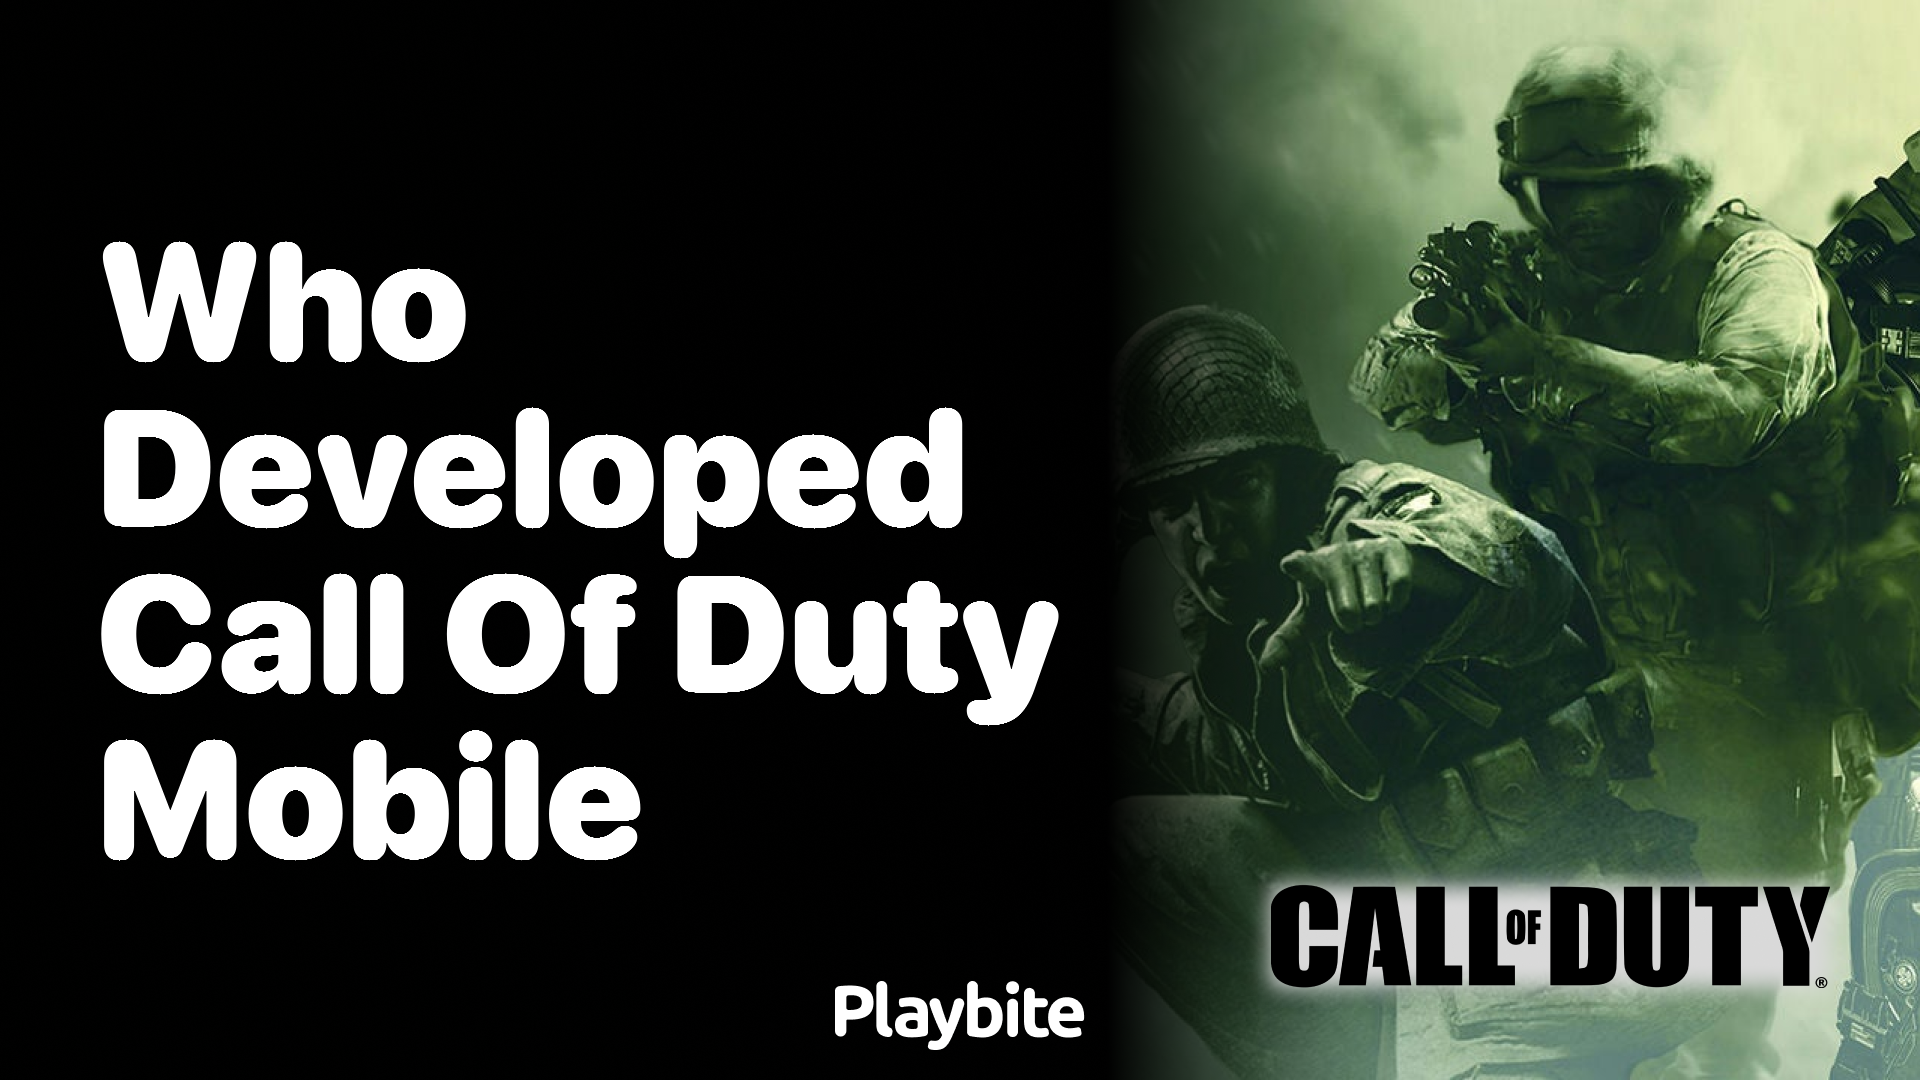 Who Developed Call of Duty Mobile?